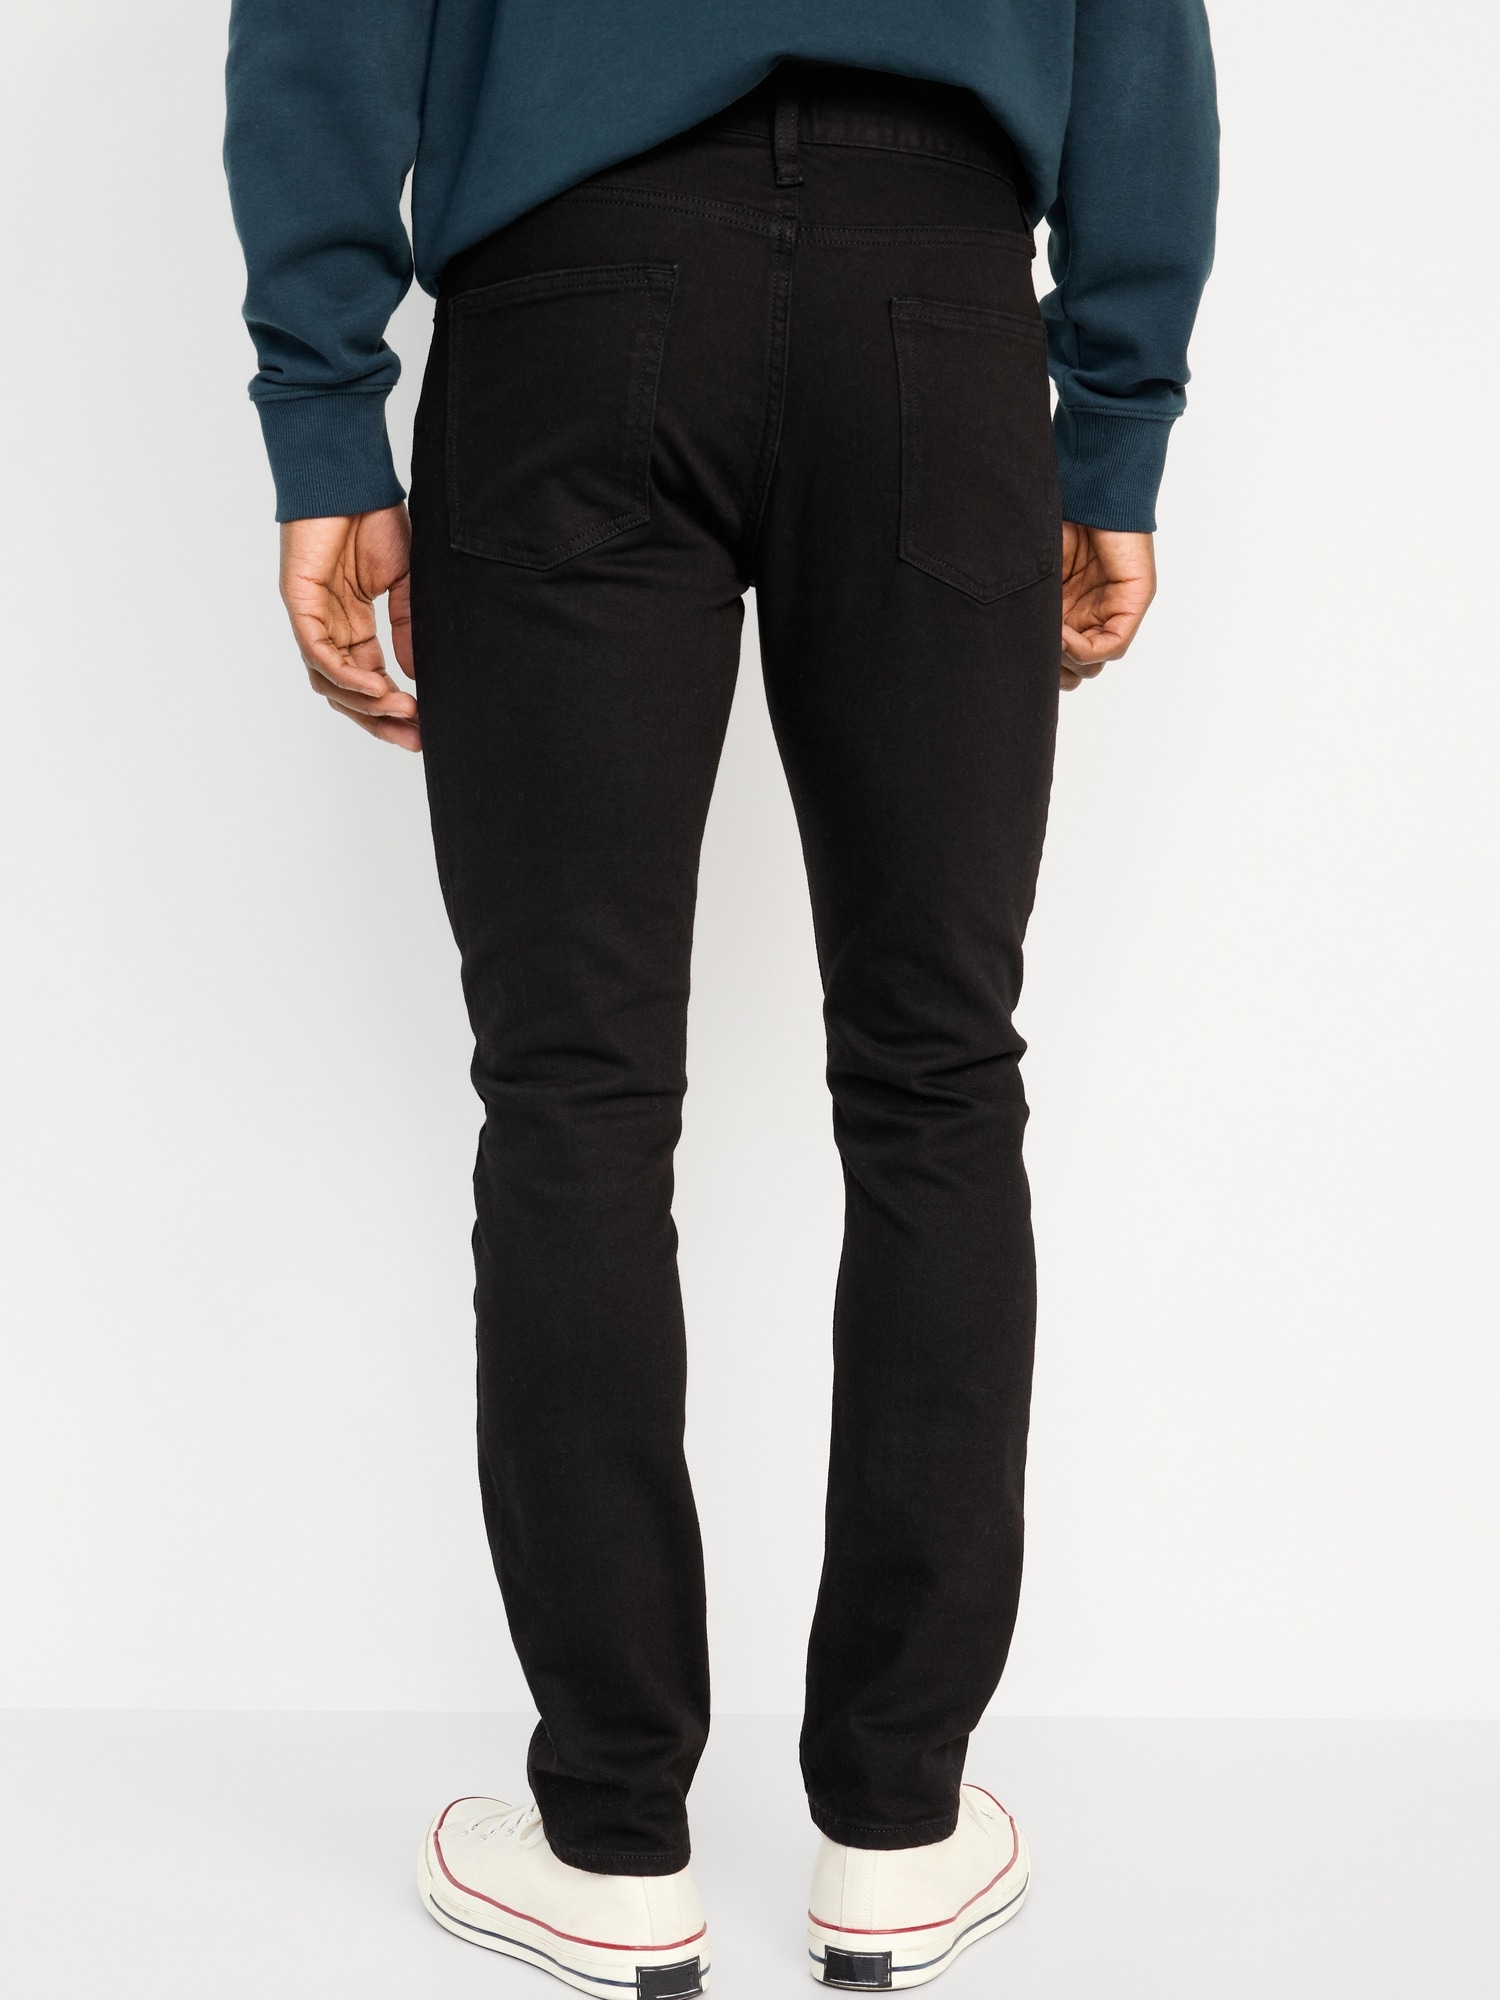 Ochre-accent Prince of Wales stretch pant Slim fit, Only & Sons, Shop  Men's Skinny Pants